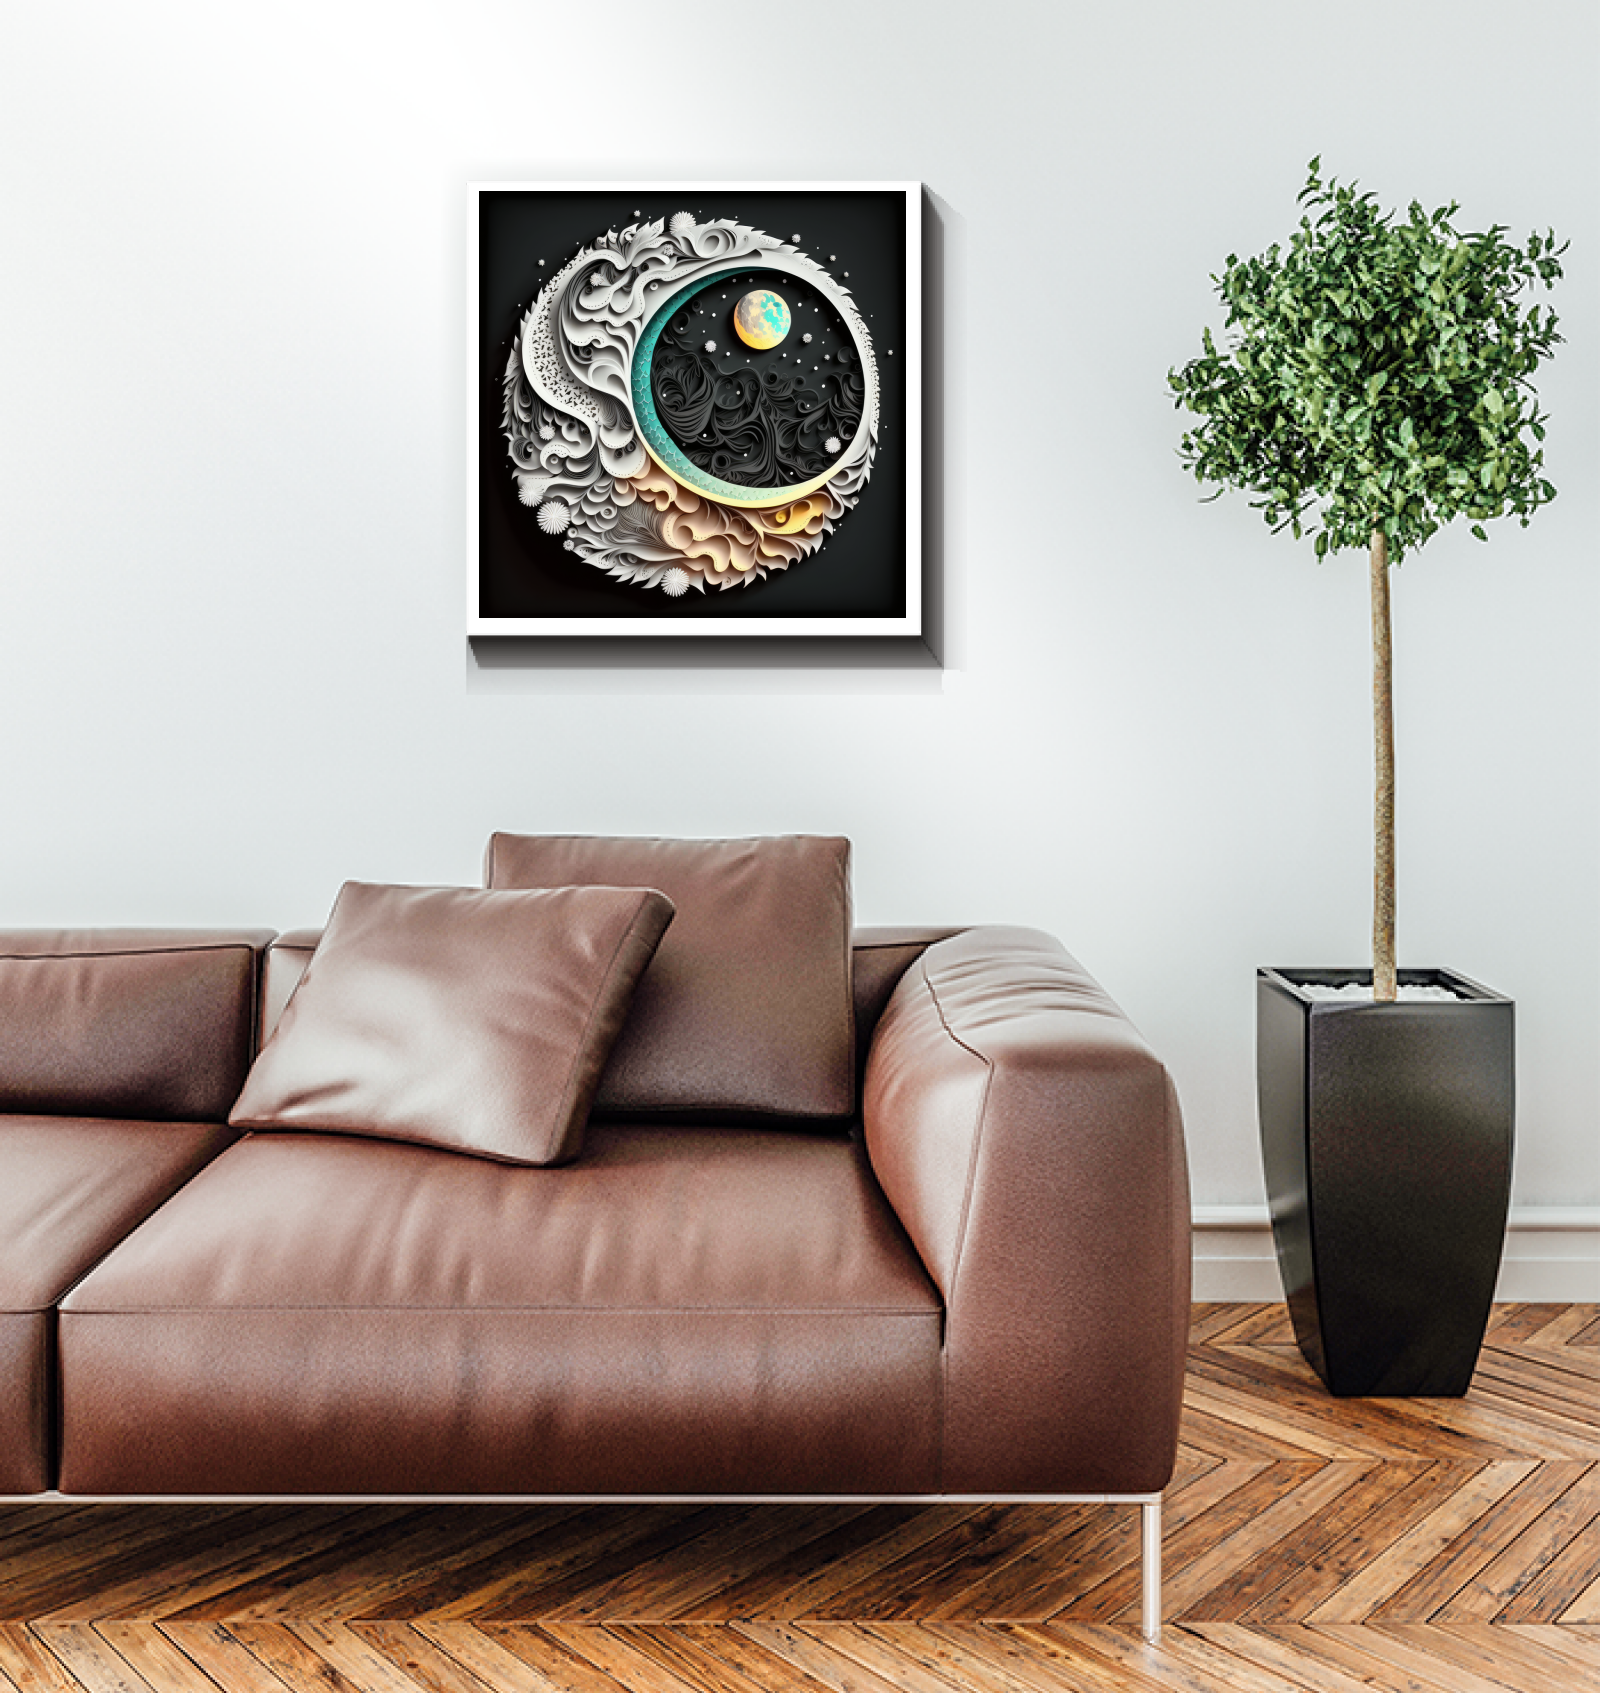 Leaf and stone canvas art for peaceful decor.